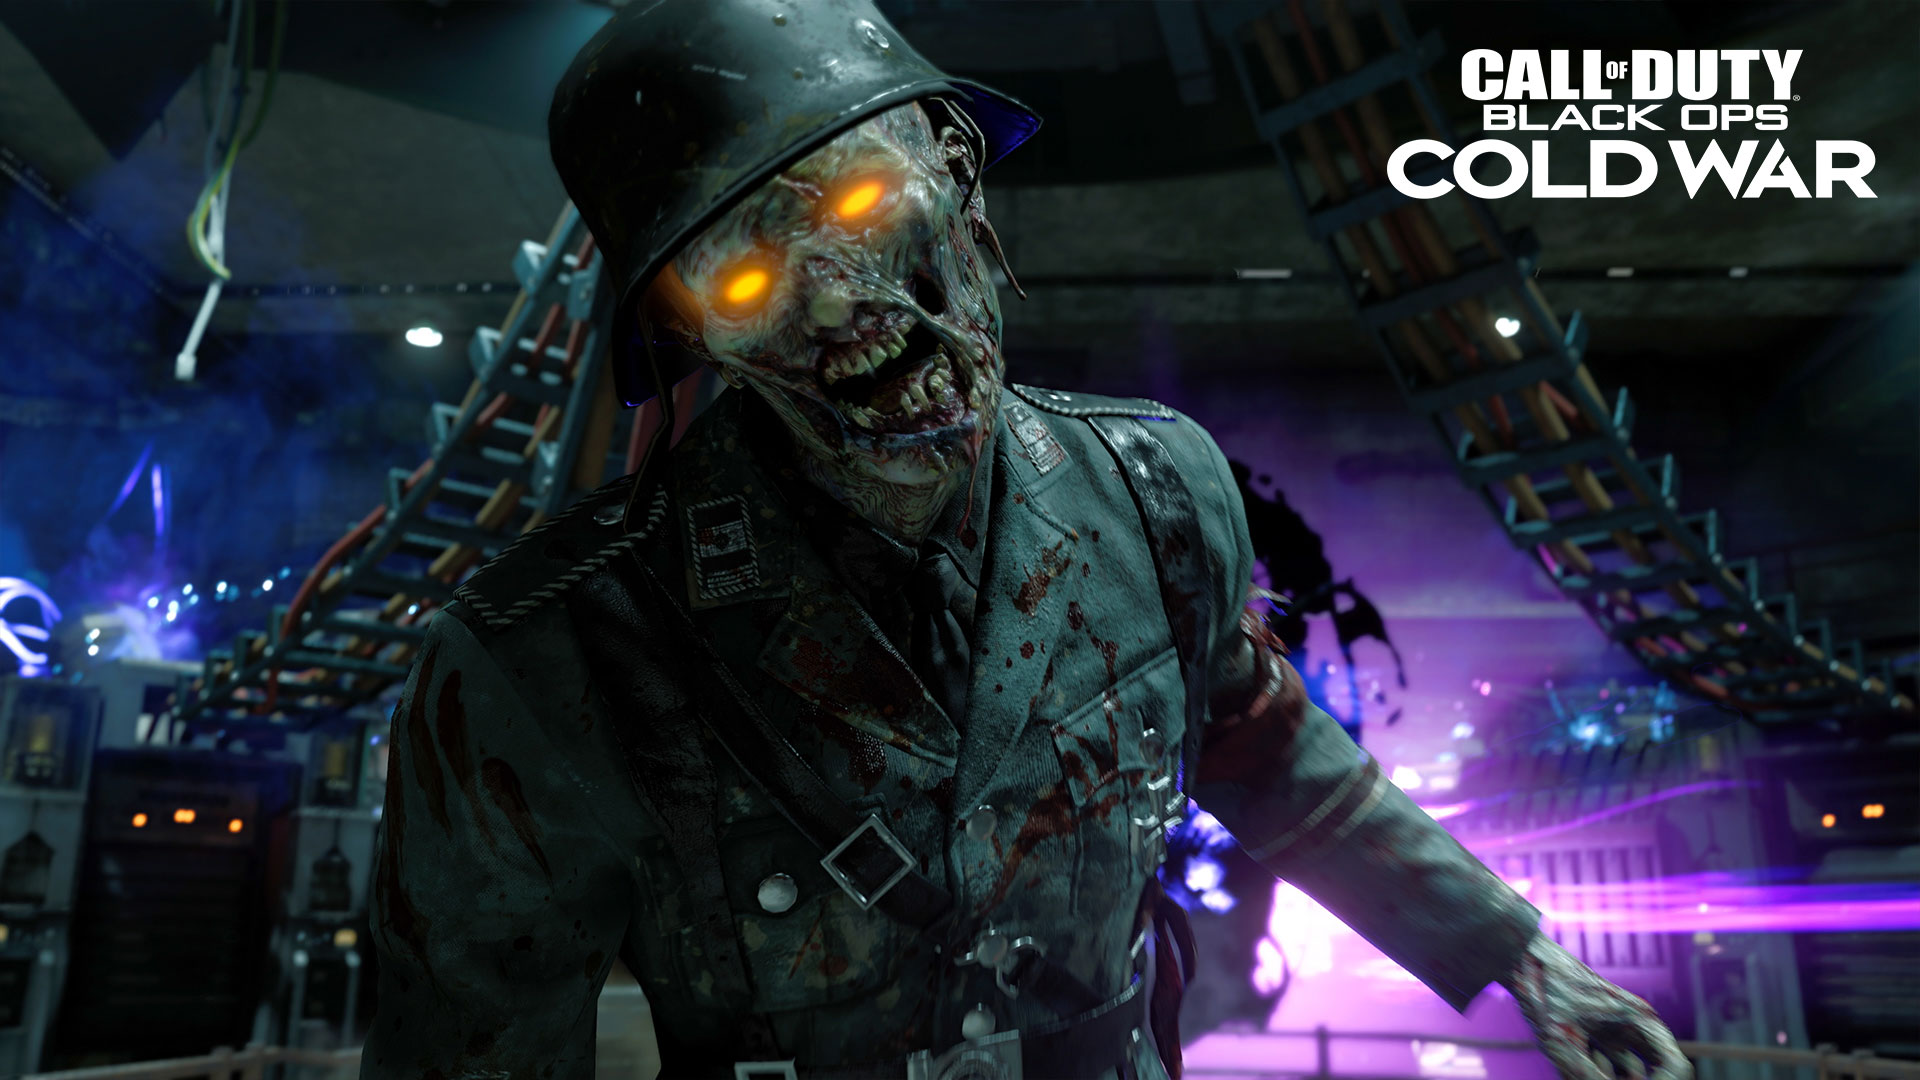 COD Black Ops Cold War Zombies طور